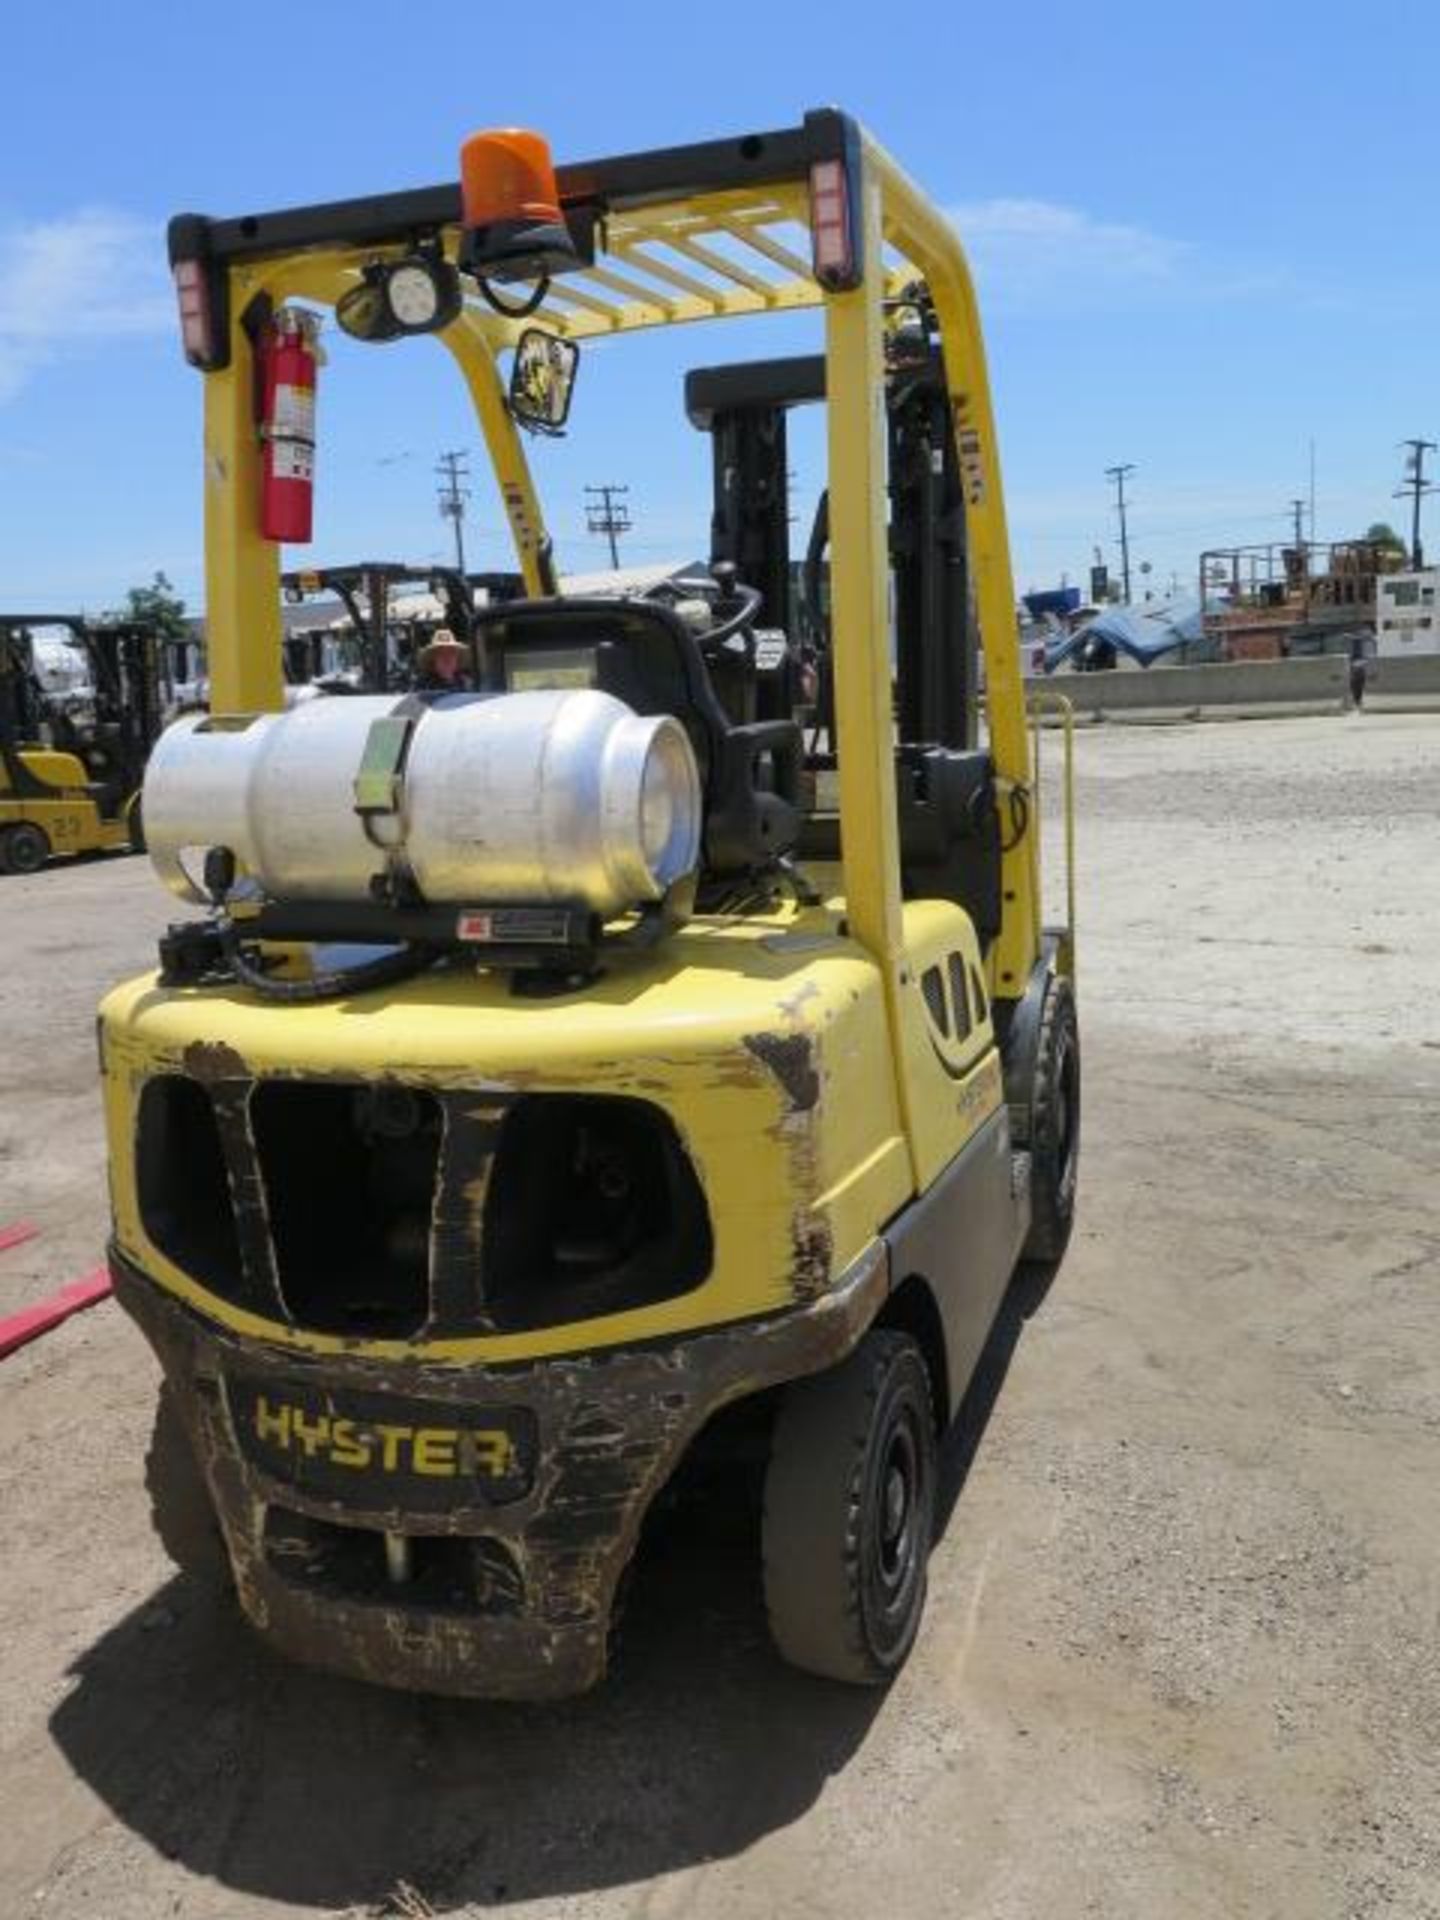 2018 Hyster H50FT 5000 Lb LPG Forklift s/n P177V06250 w/ 3-Stage, 189” Lift, Side Shift, SOLD AS IS - Image 10 of 24